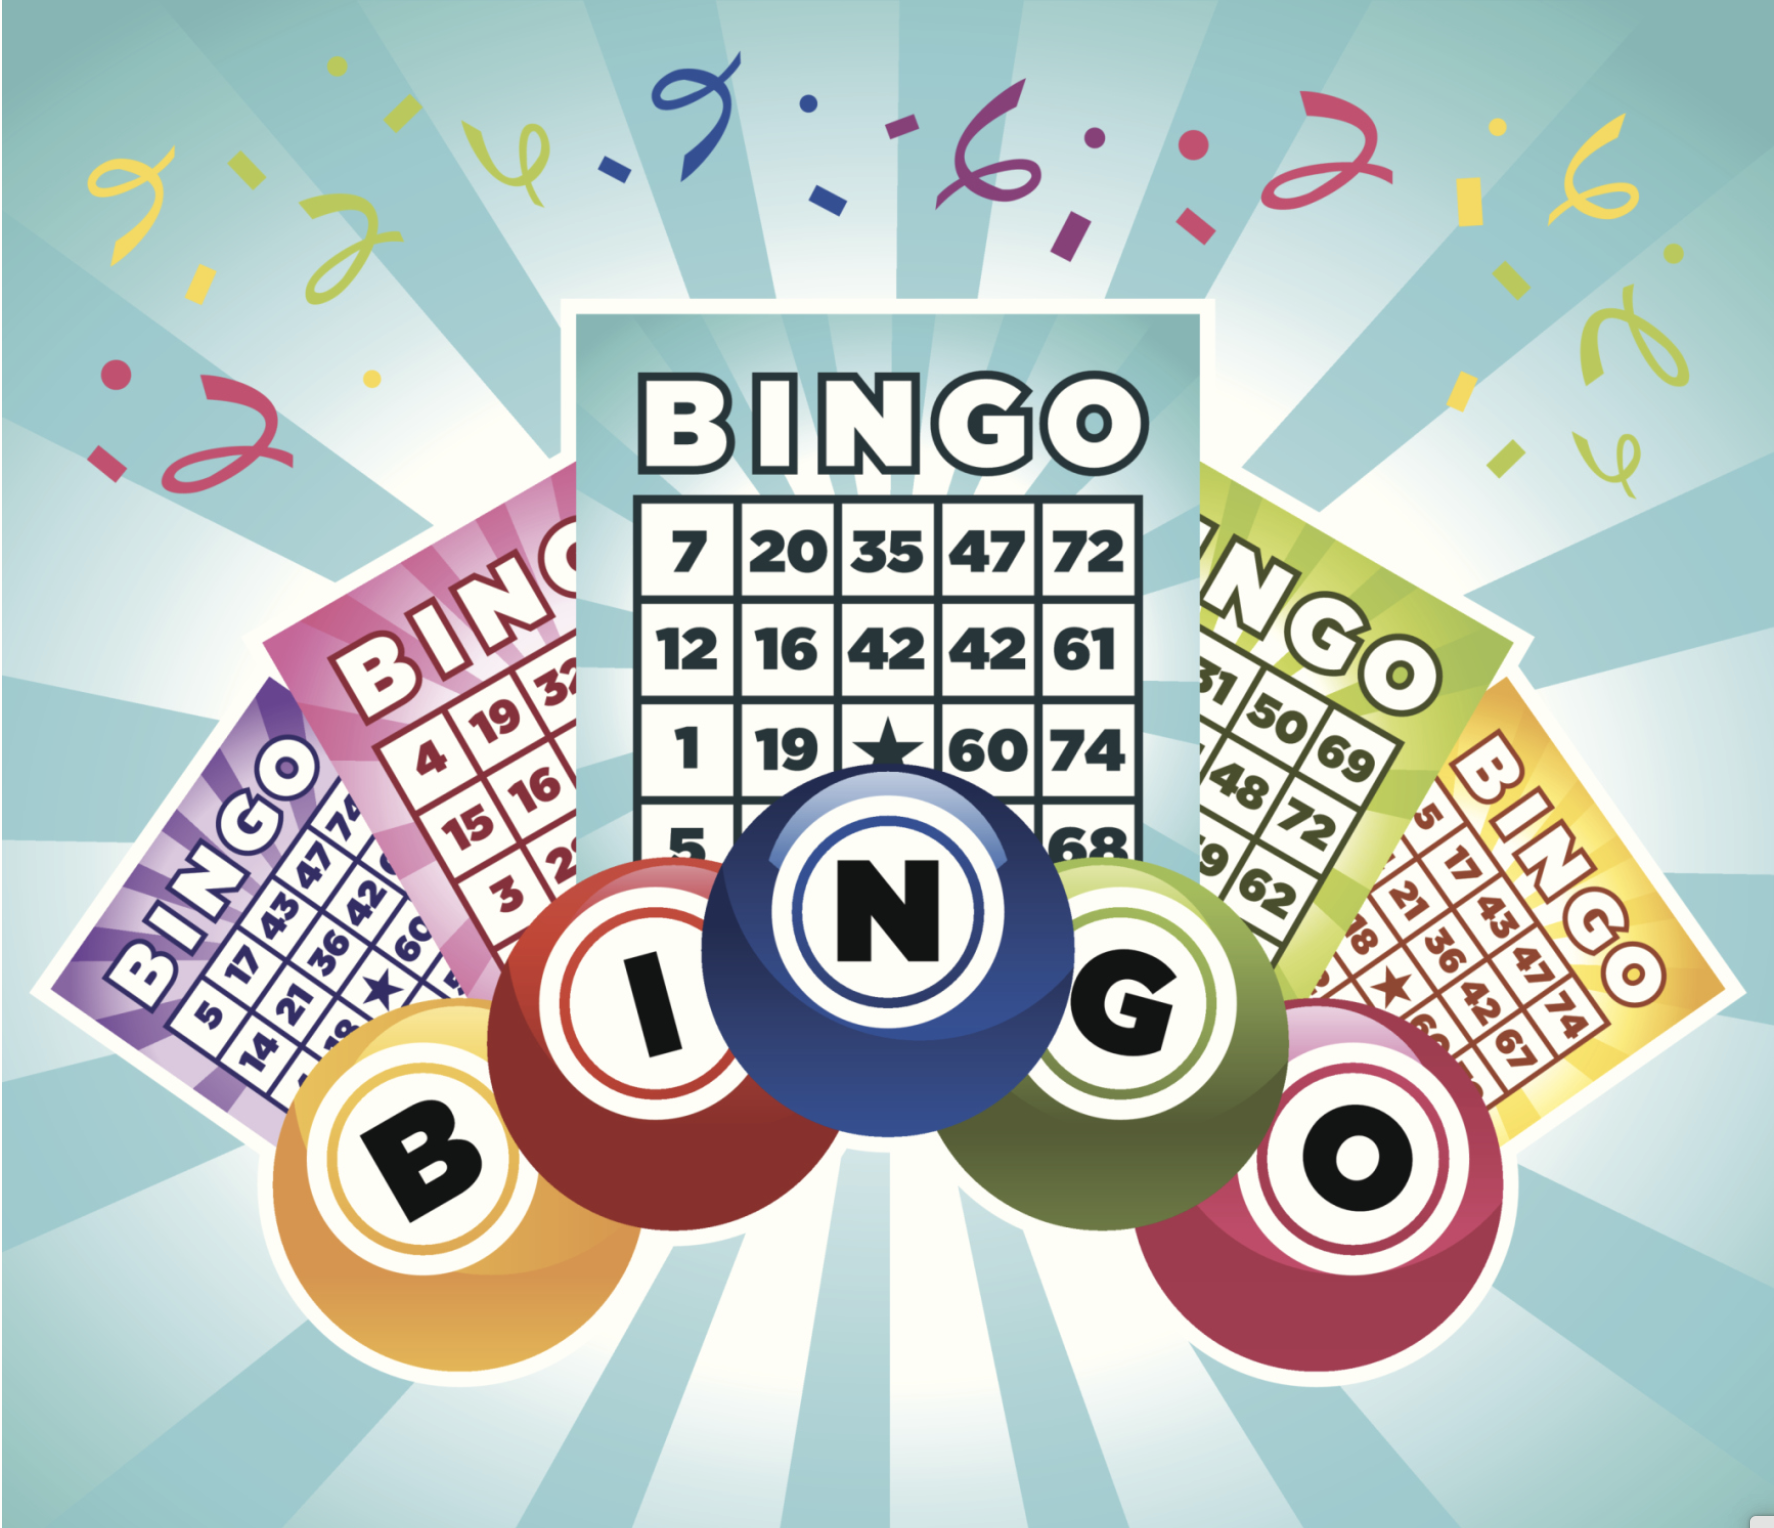 Virtual Bingo's tight-knit community has endured through thick and thin, reaching far beyond UNL campus and incorporating not only students but their families and university staff.